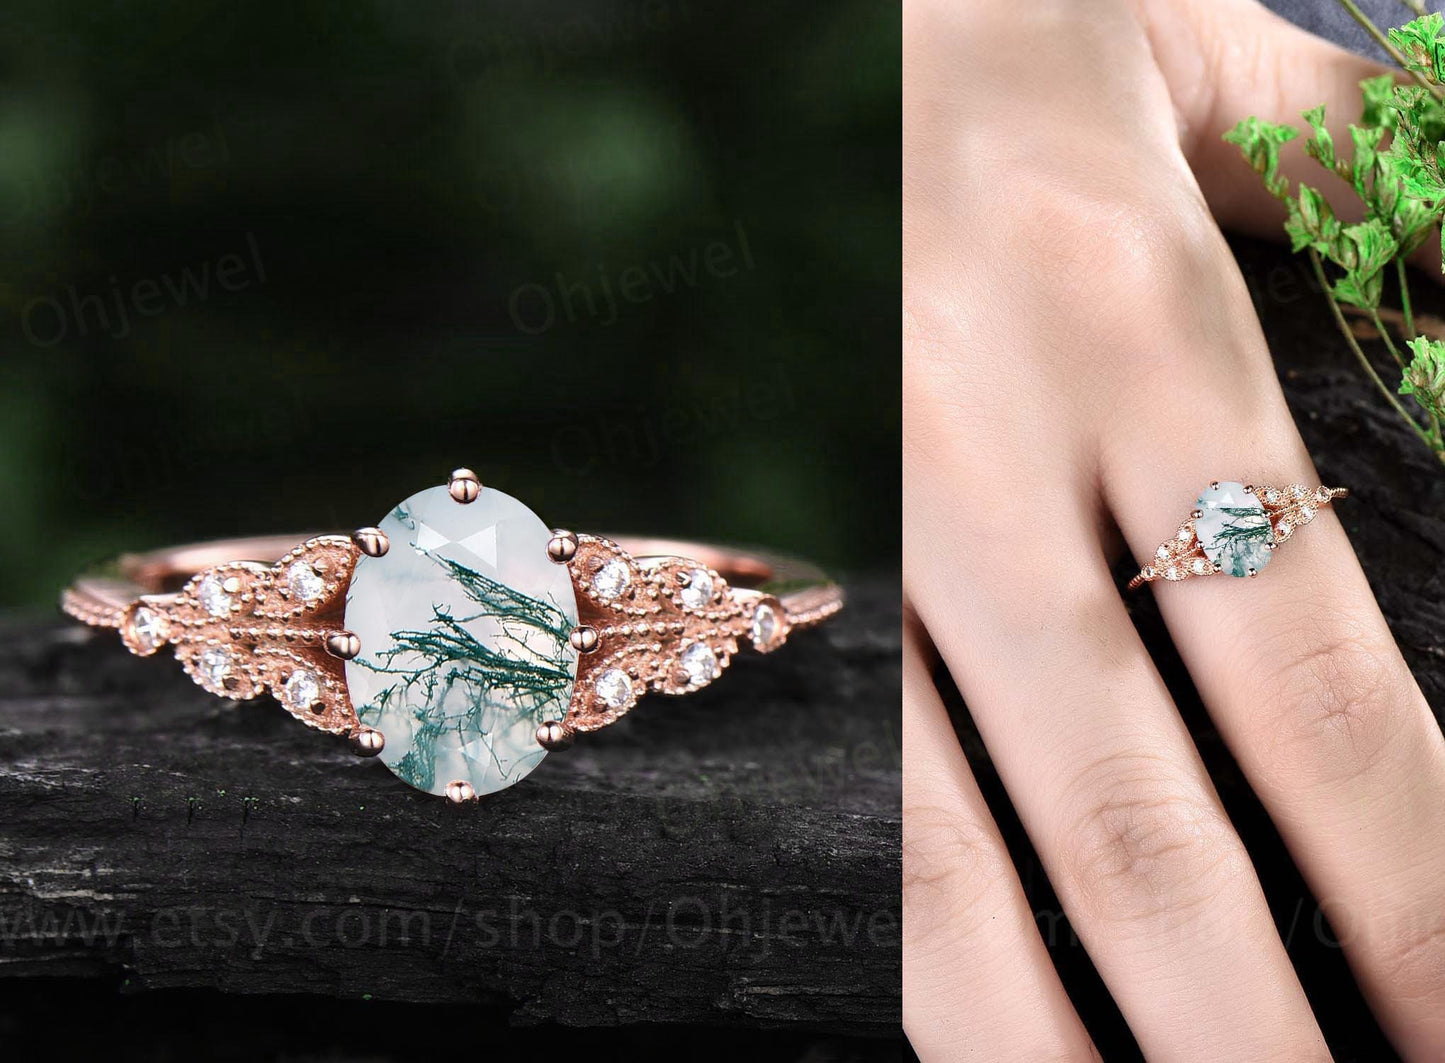 Oval Alexandrite engagement ring leaf flower marquise milgrain unique vintage rose gold engagement ring for women anniversary wedding ring